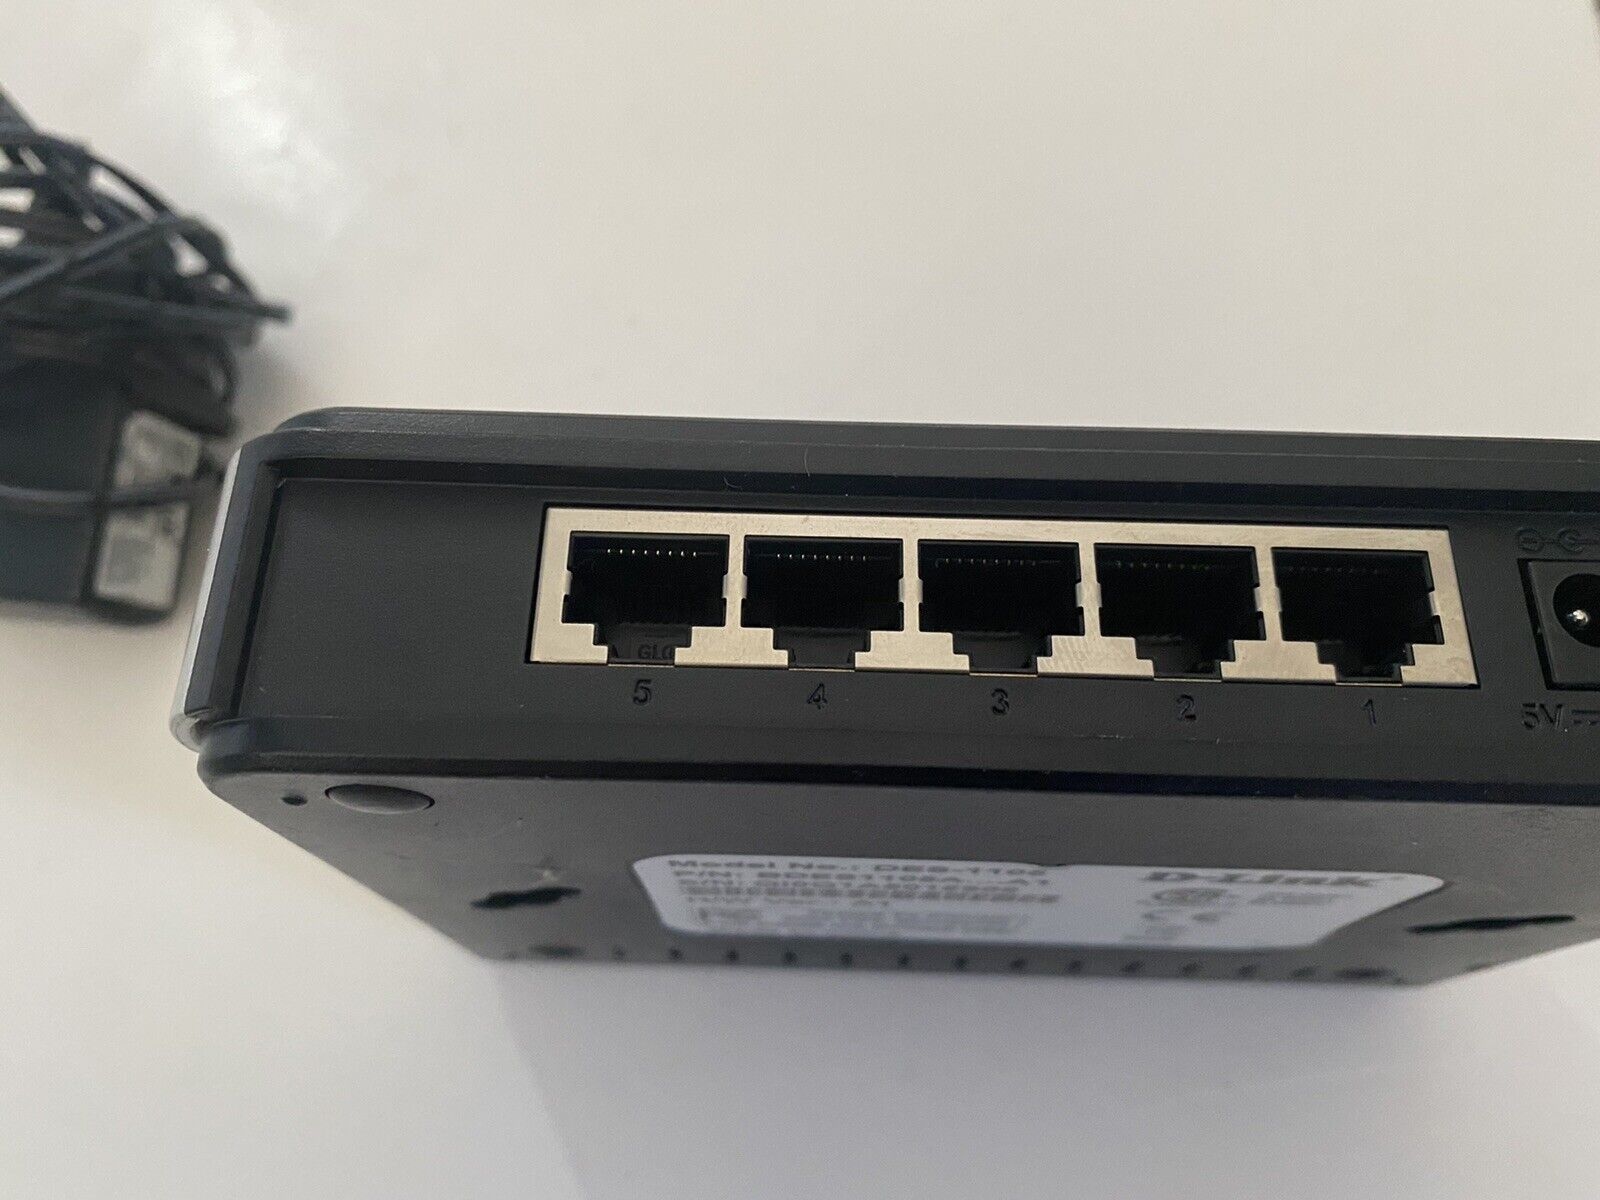 How To Connect MiFi To A Network Switch